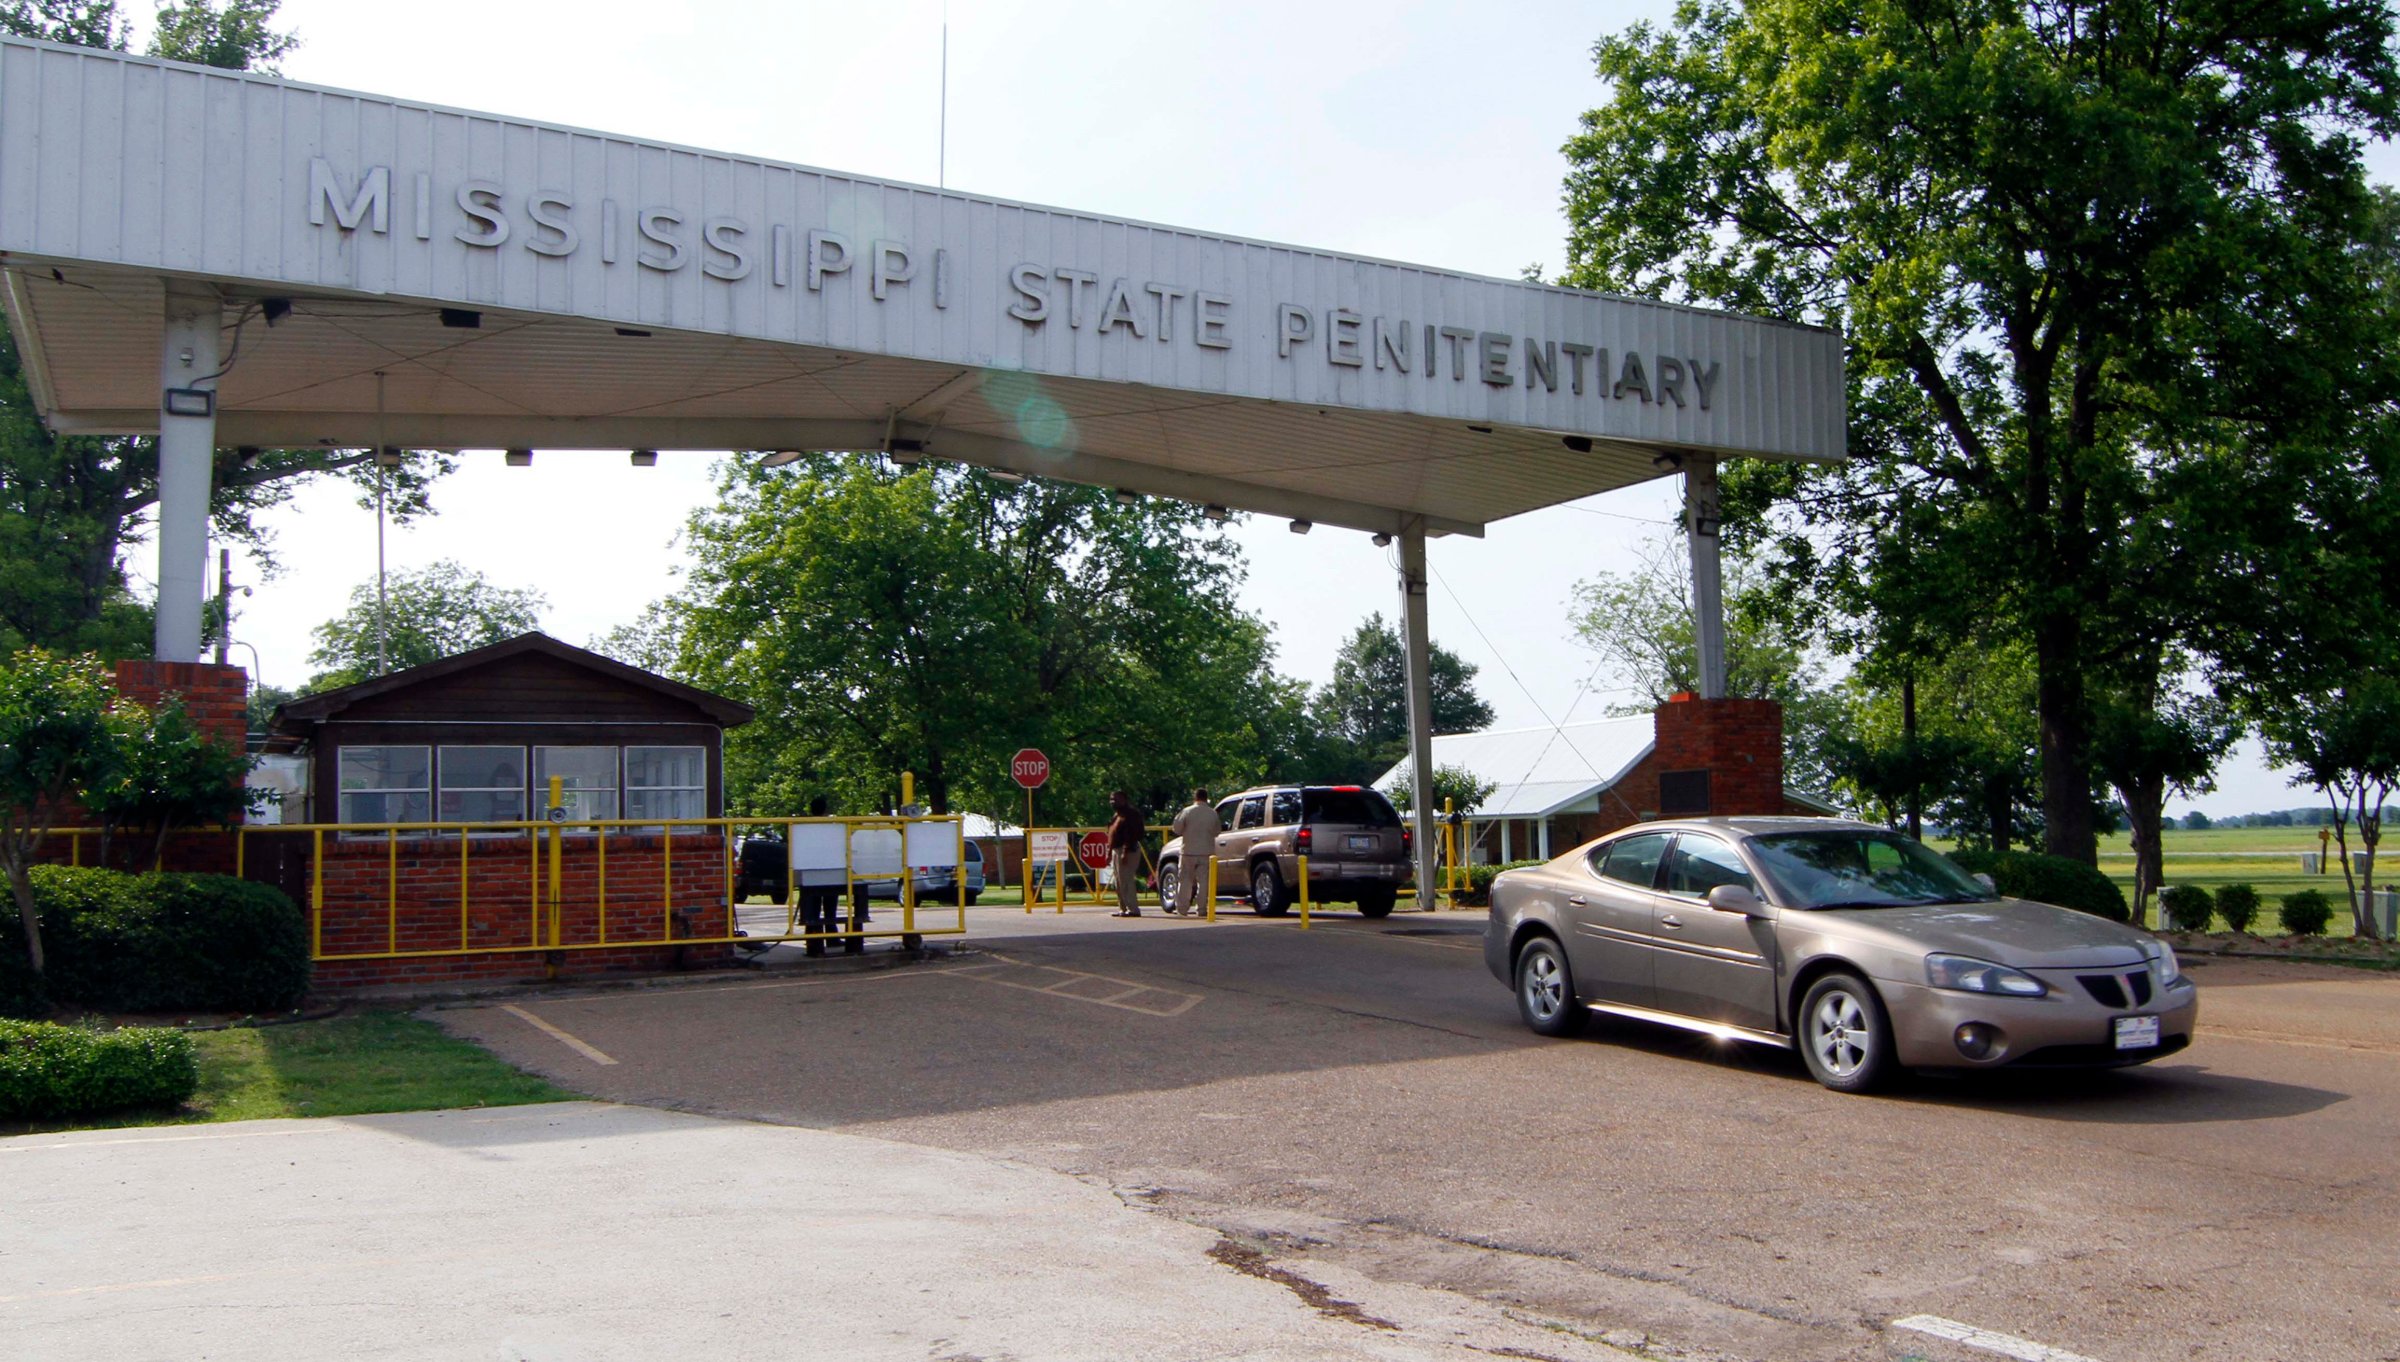 Traffic moves past the front of the Mississippi State Penitentiary in Parchman, Miss.